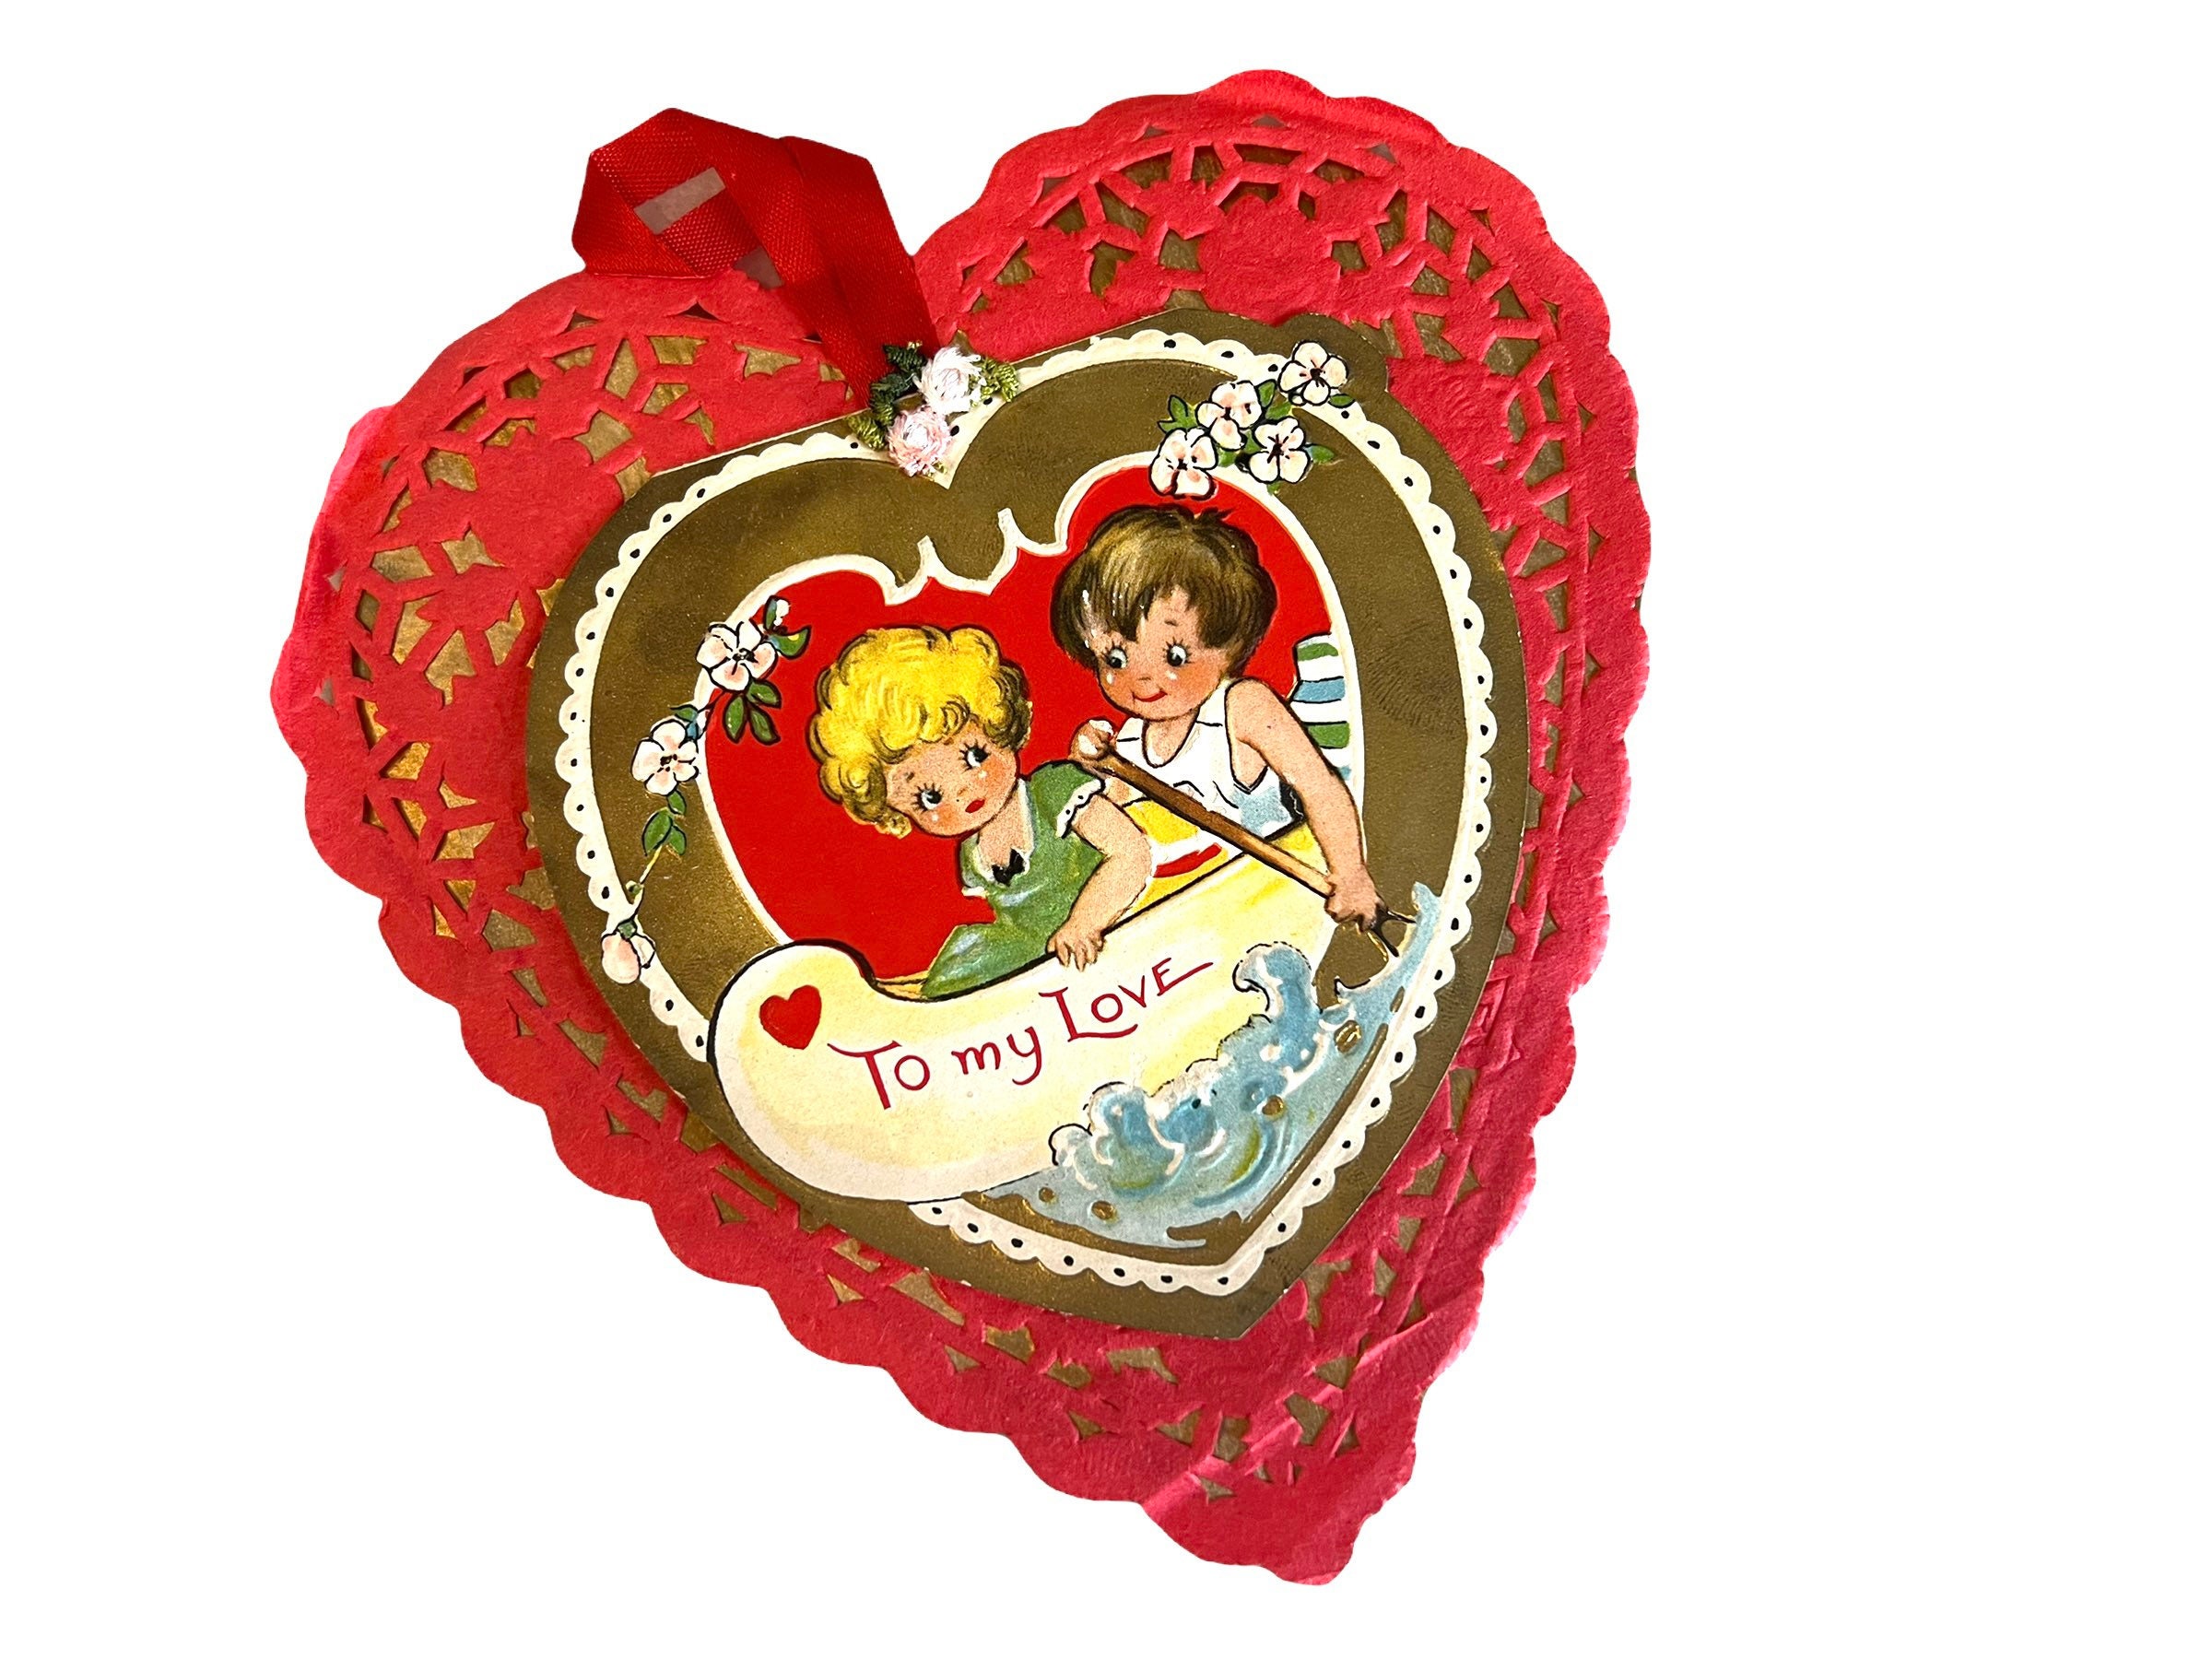 Vintage Valentines Card Gift Pretty Package Id Like To Tie You To